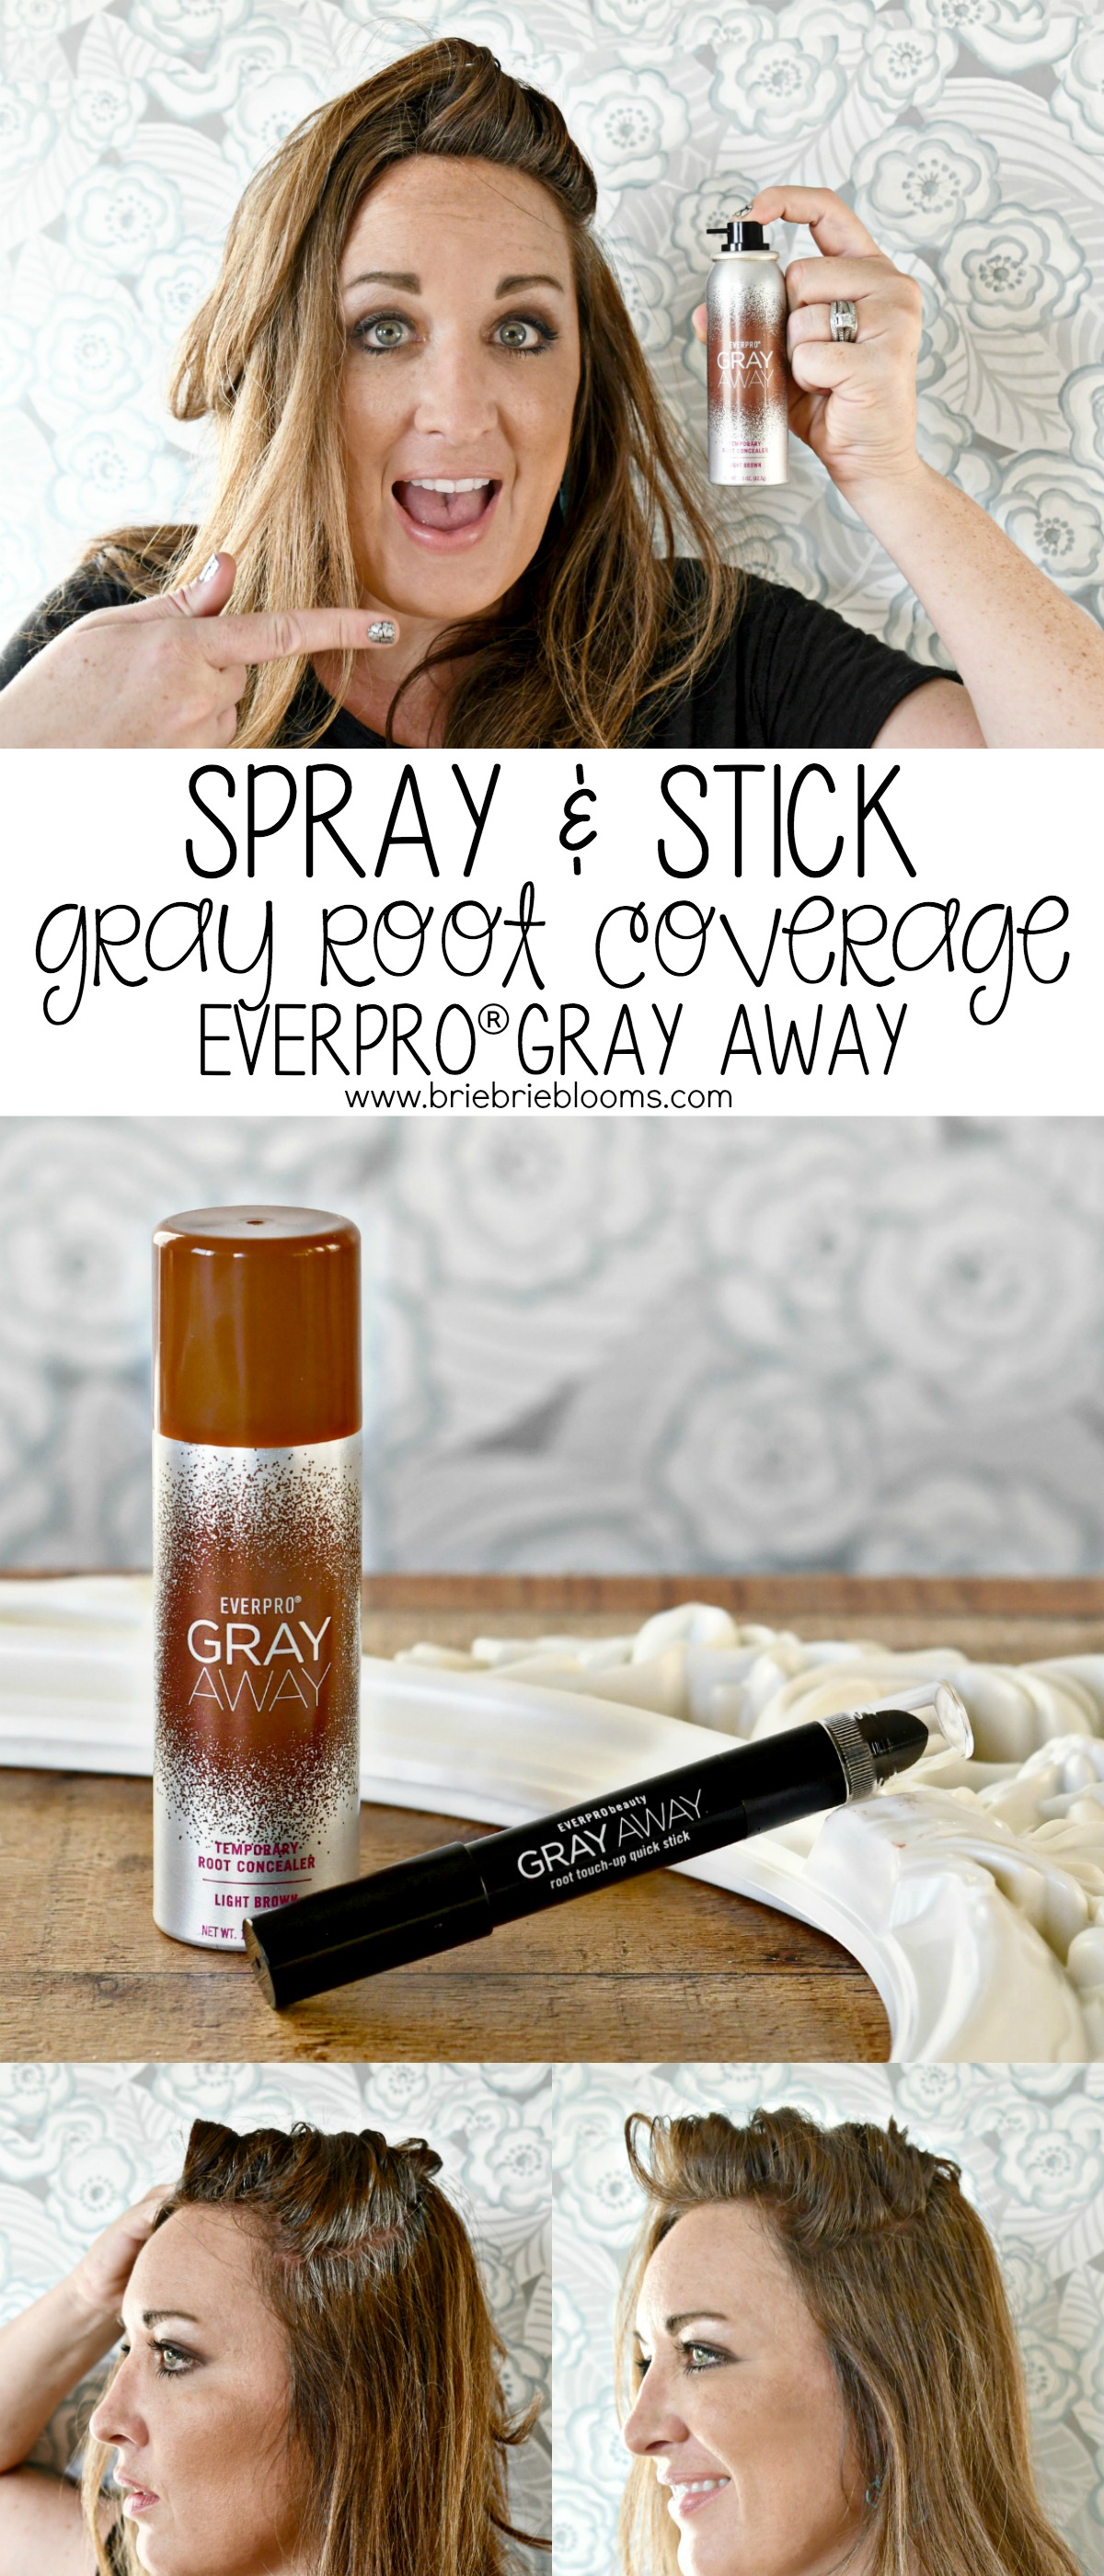 See how easy it is to use Gray Root Coverage sprays and sticks for temporary gray cover.